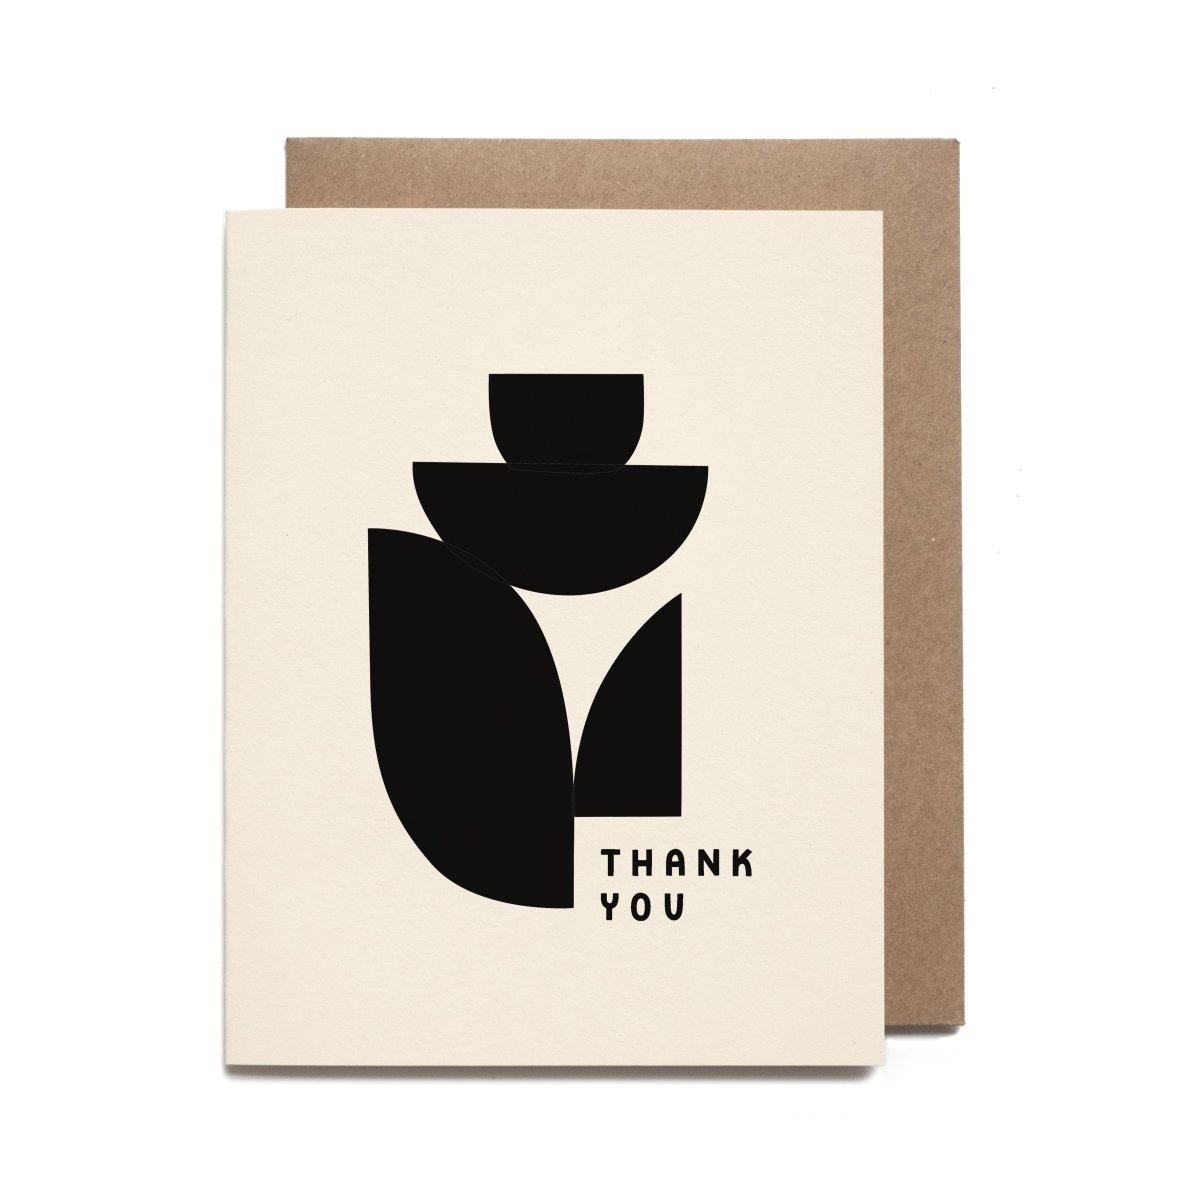 A white greeting card with black shapes. Front of card reads: "THANK YOU." Designed and handcrafted by Worthwhile Paper in Ypsilanti, MI.